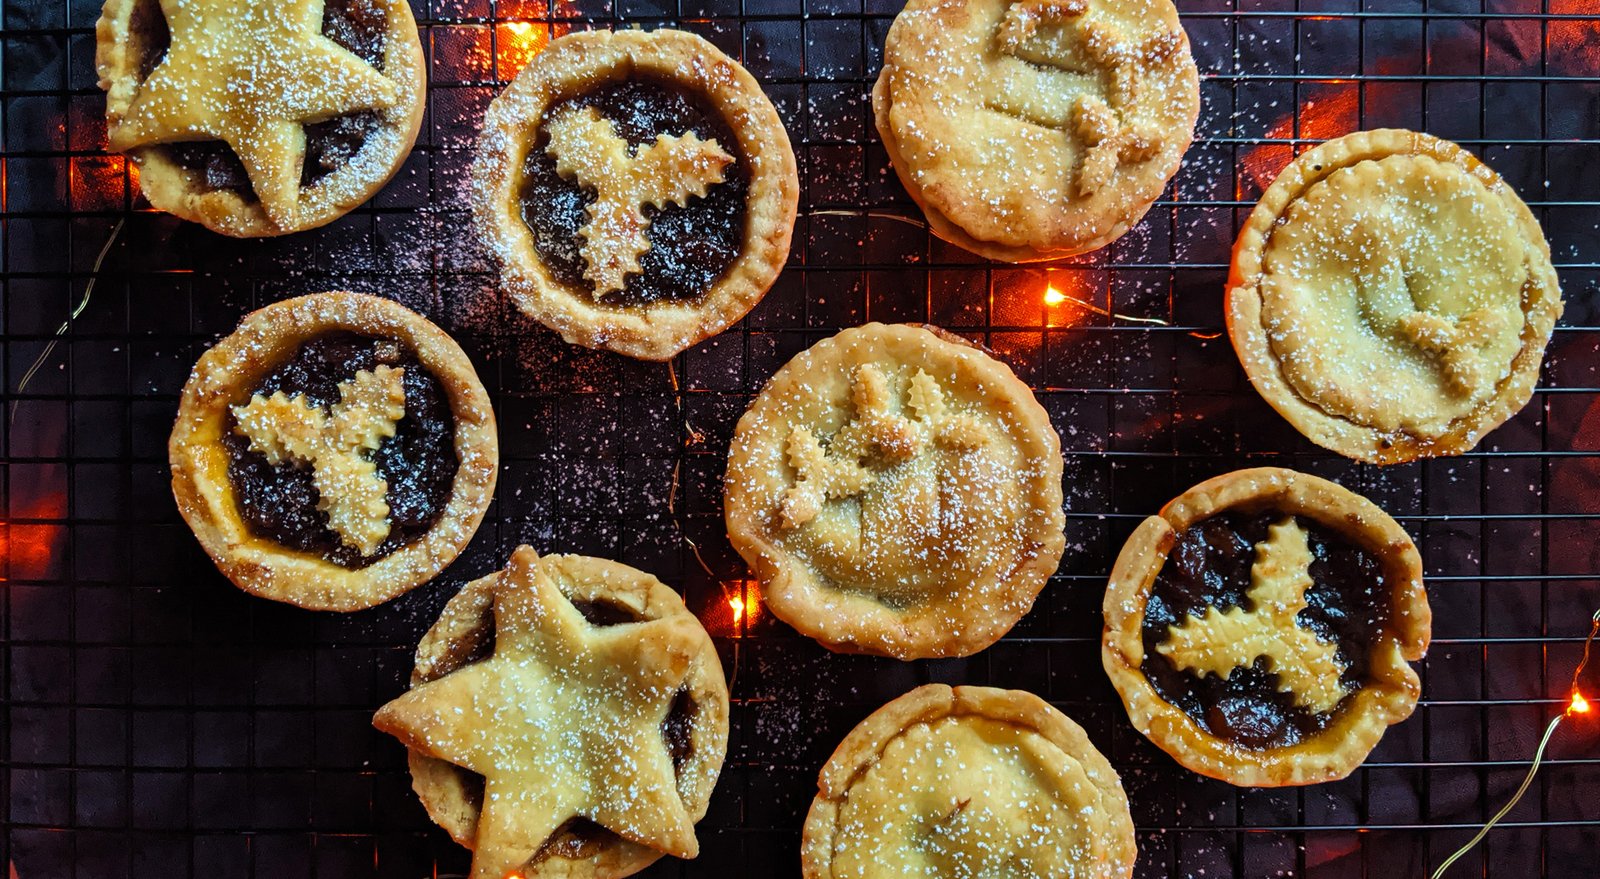 Woolworths recalls mince pies